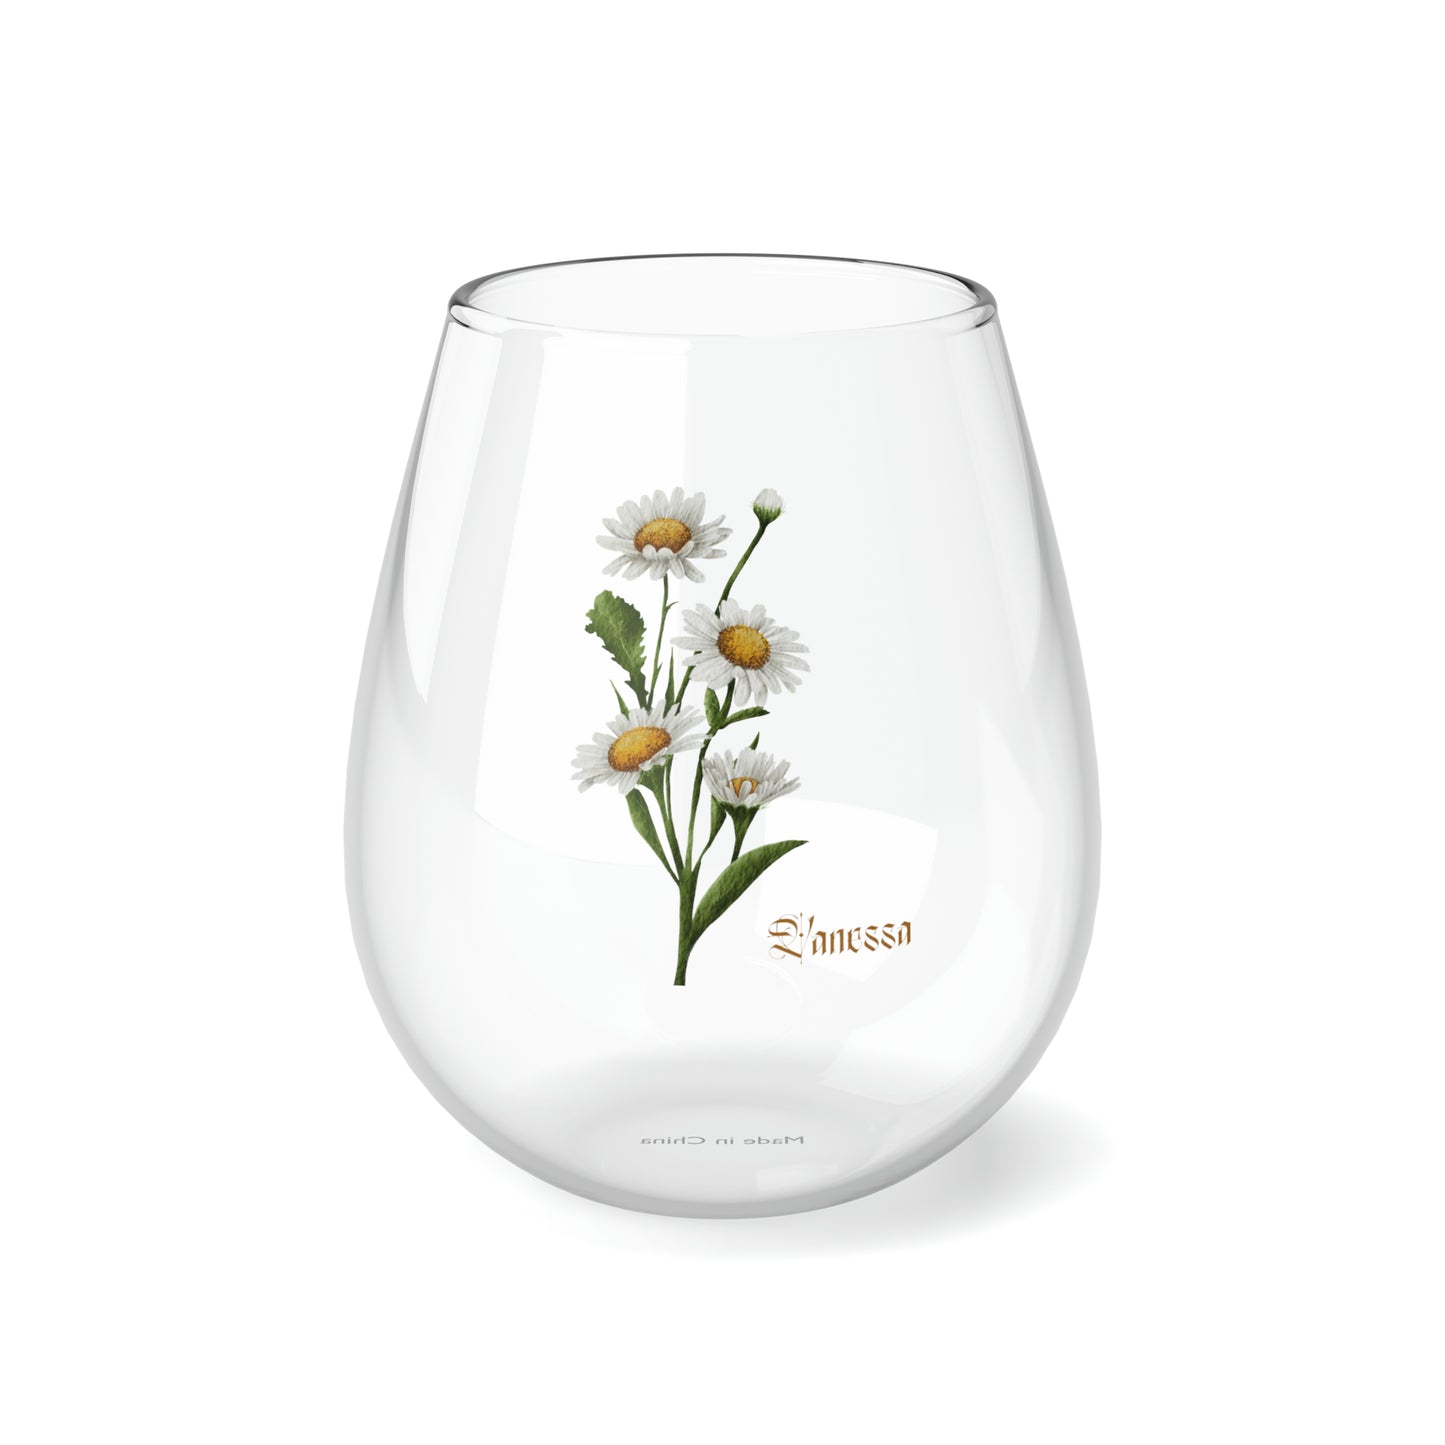 April PERSONALIZED Birth Flower Wine Glass, Birth Flower Gifts, Birth Flower wine glass, Birth Flower Gifts for Women, Gift for coworker, sister gift, birthday gift, Valentine gift, Stemless Wine Glass, 11.75oz